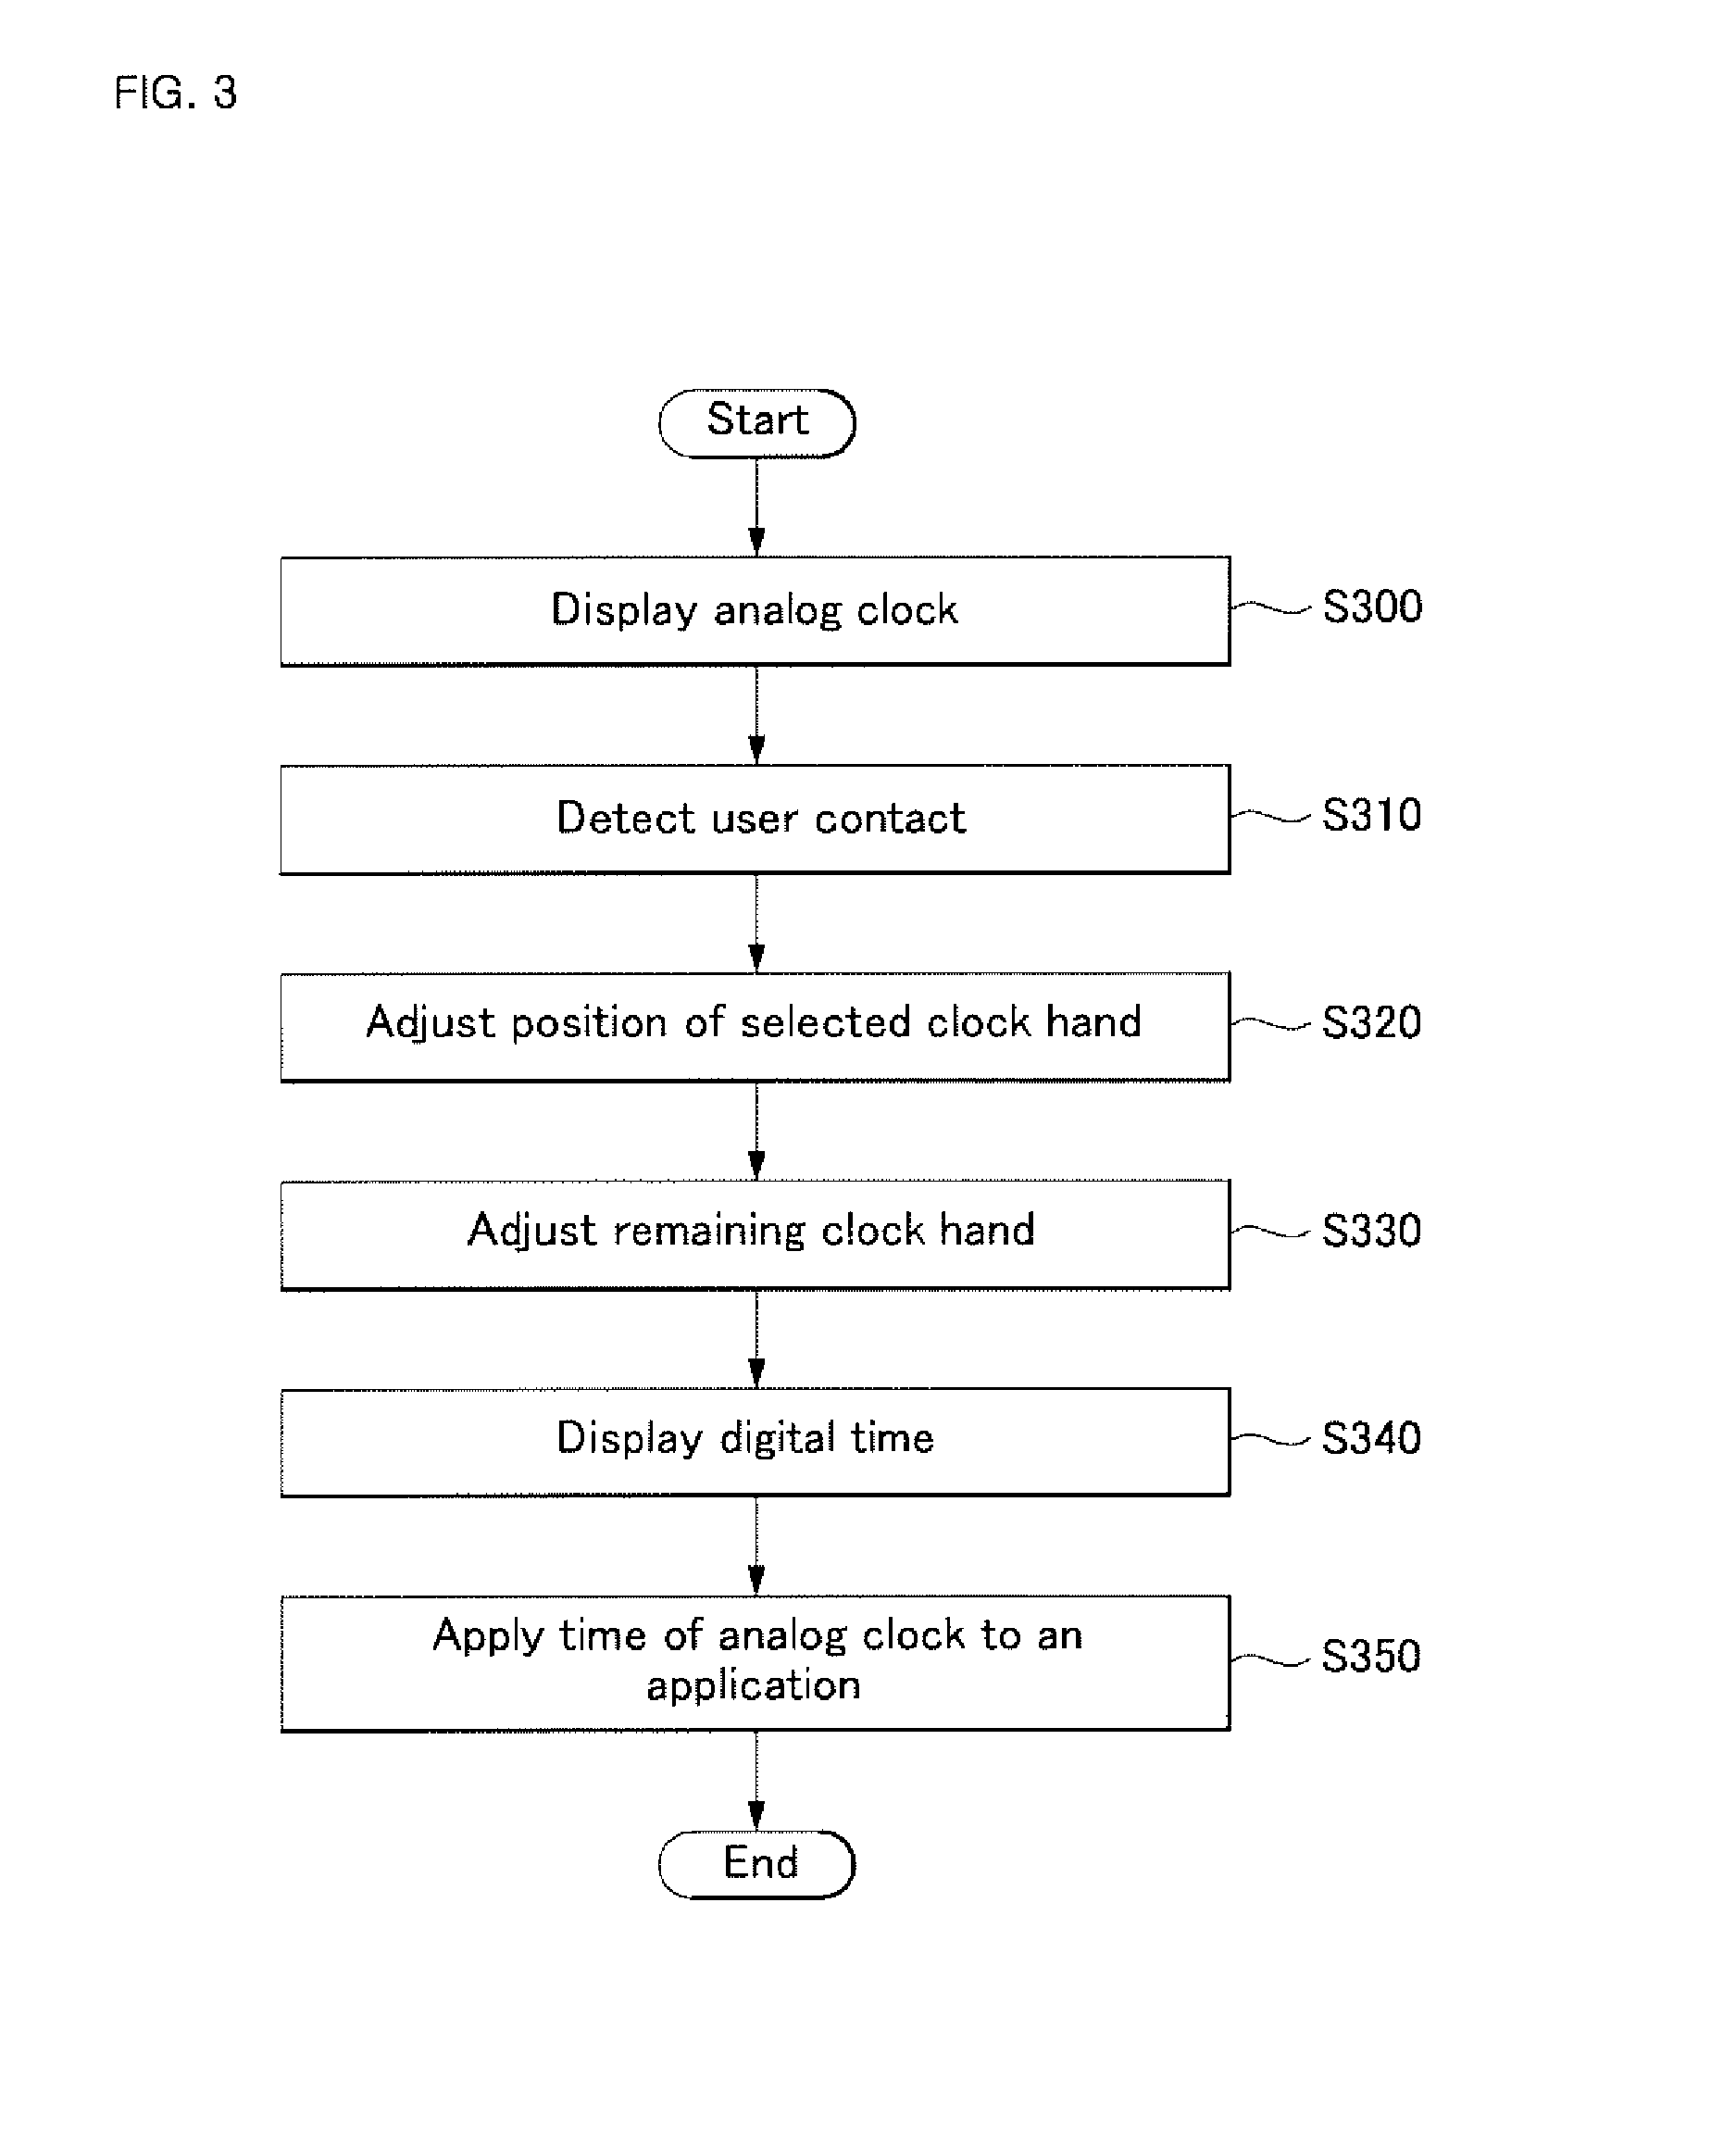 Electronic device with a touchscreen displaying an analog clock